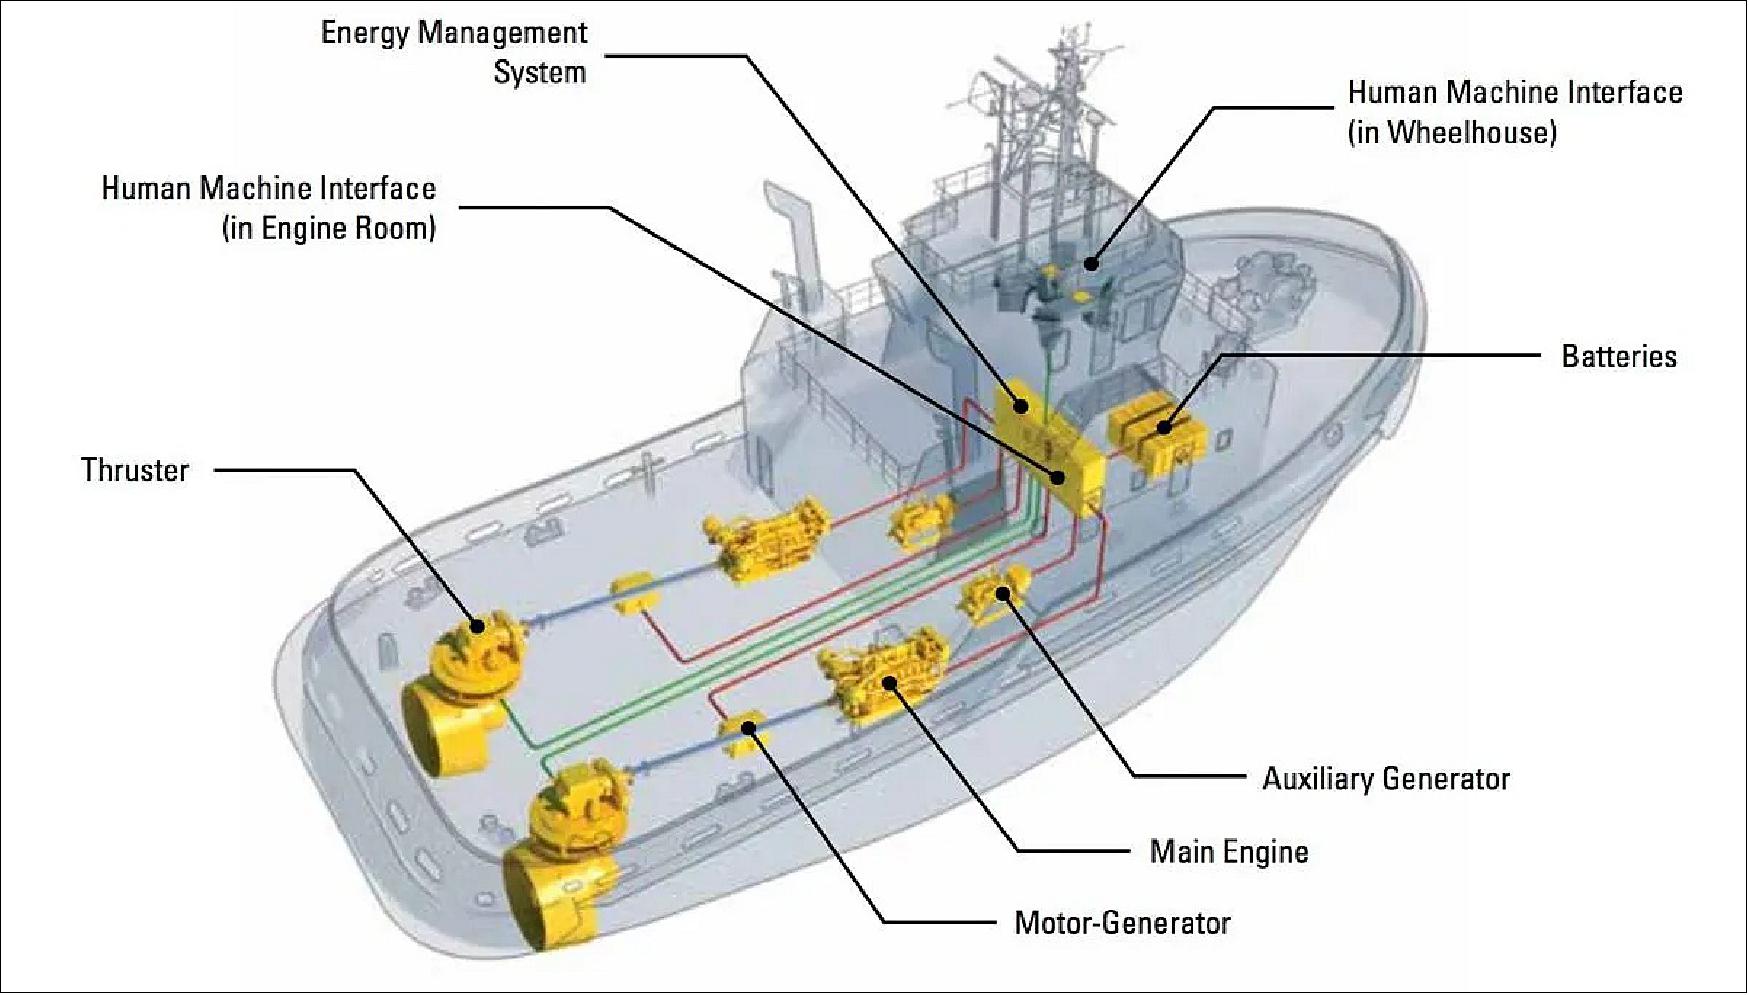 Figure 60: An example of a Cat Marine Hybrid system. It allows for operation in four different modes (image source: Cat Marine)